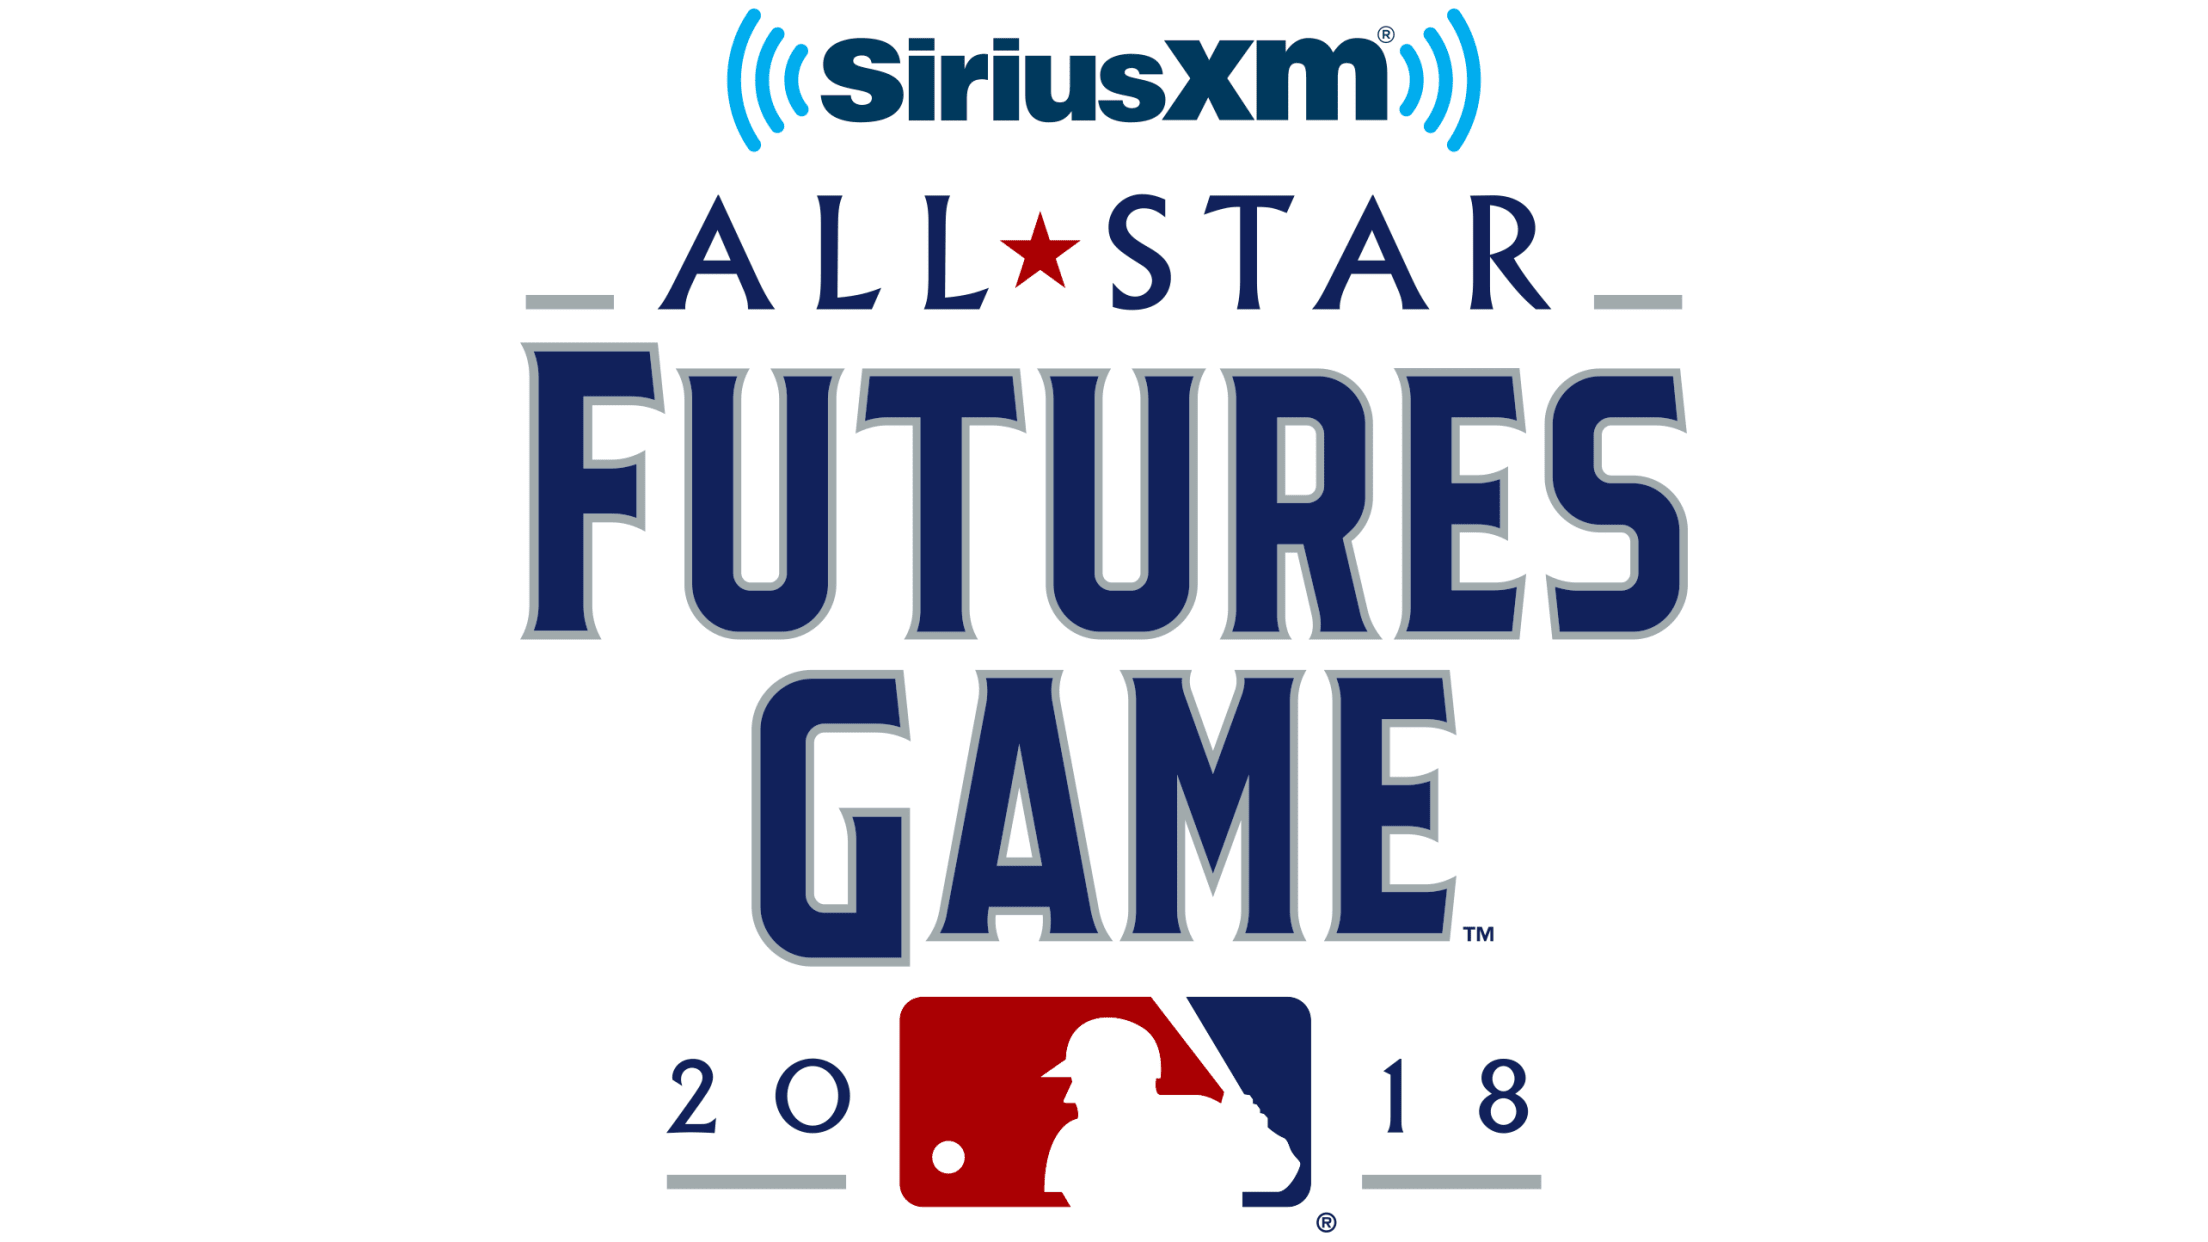 2018 All-Star Futures Game, 07/15/2018